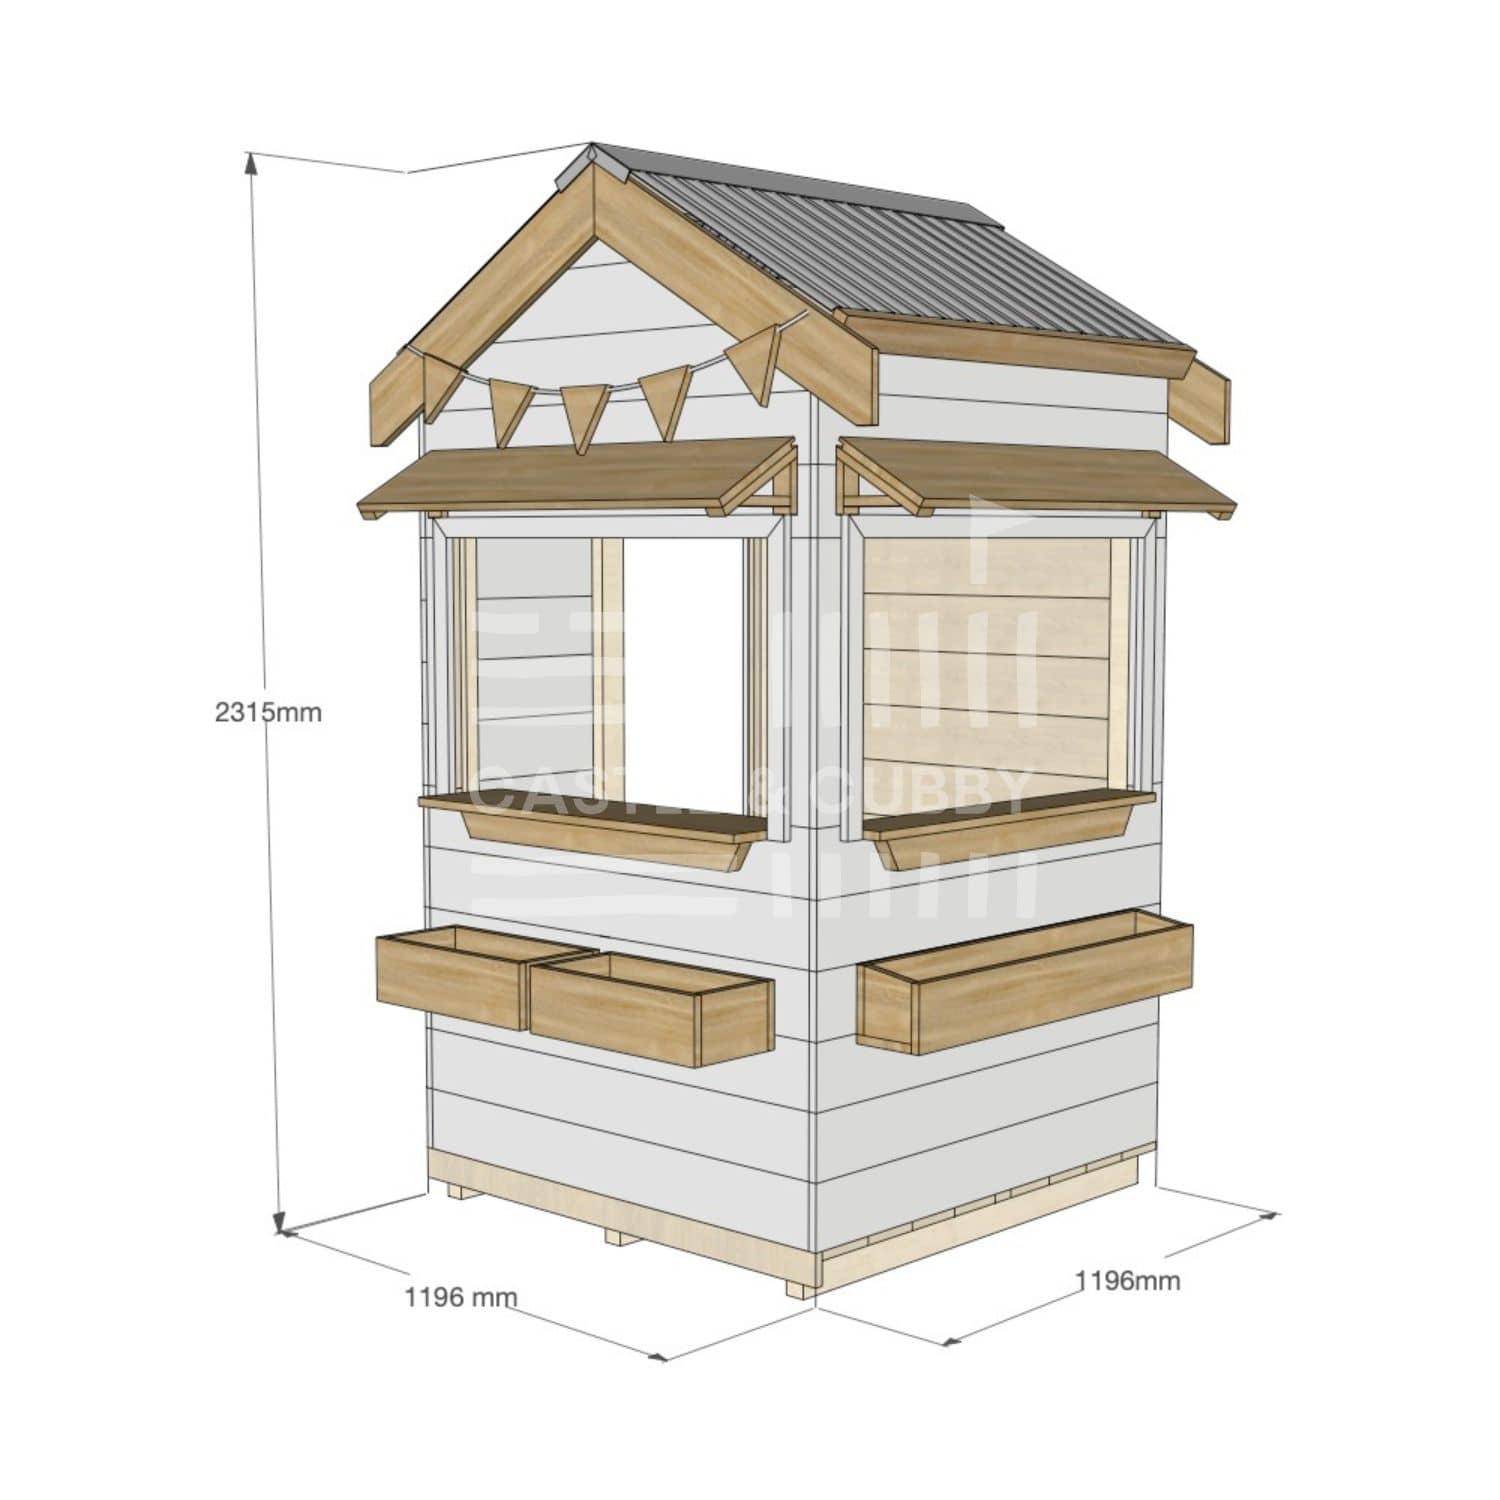 Pitched roof extra height painted wooden cubby house commercial education little square dimensions